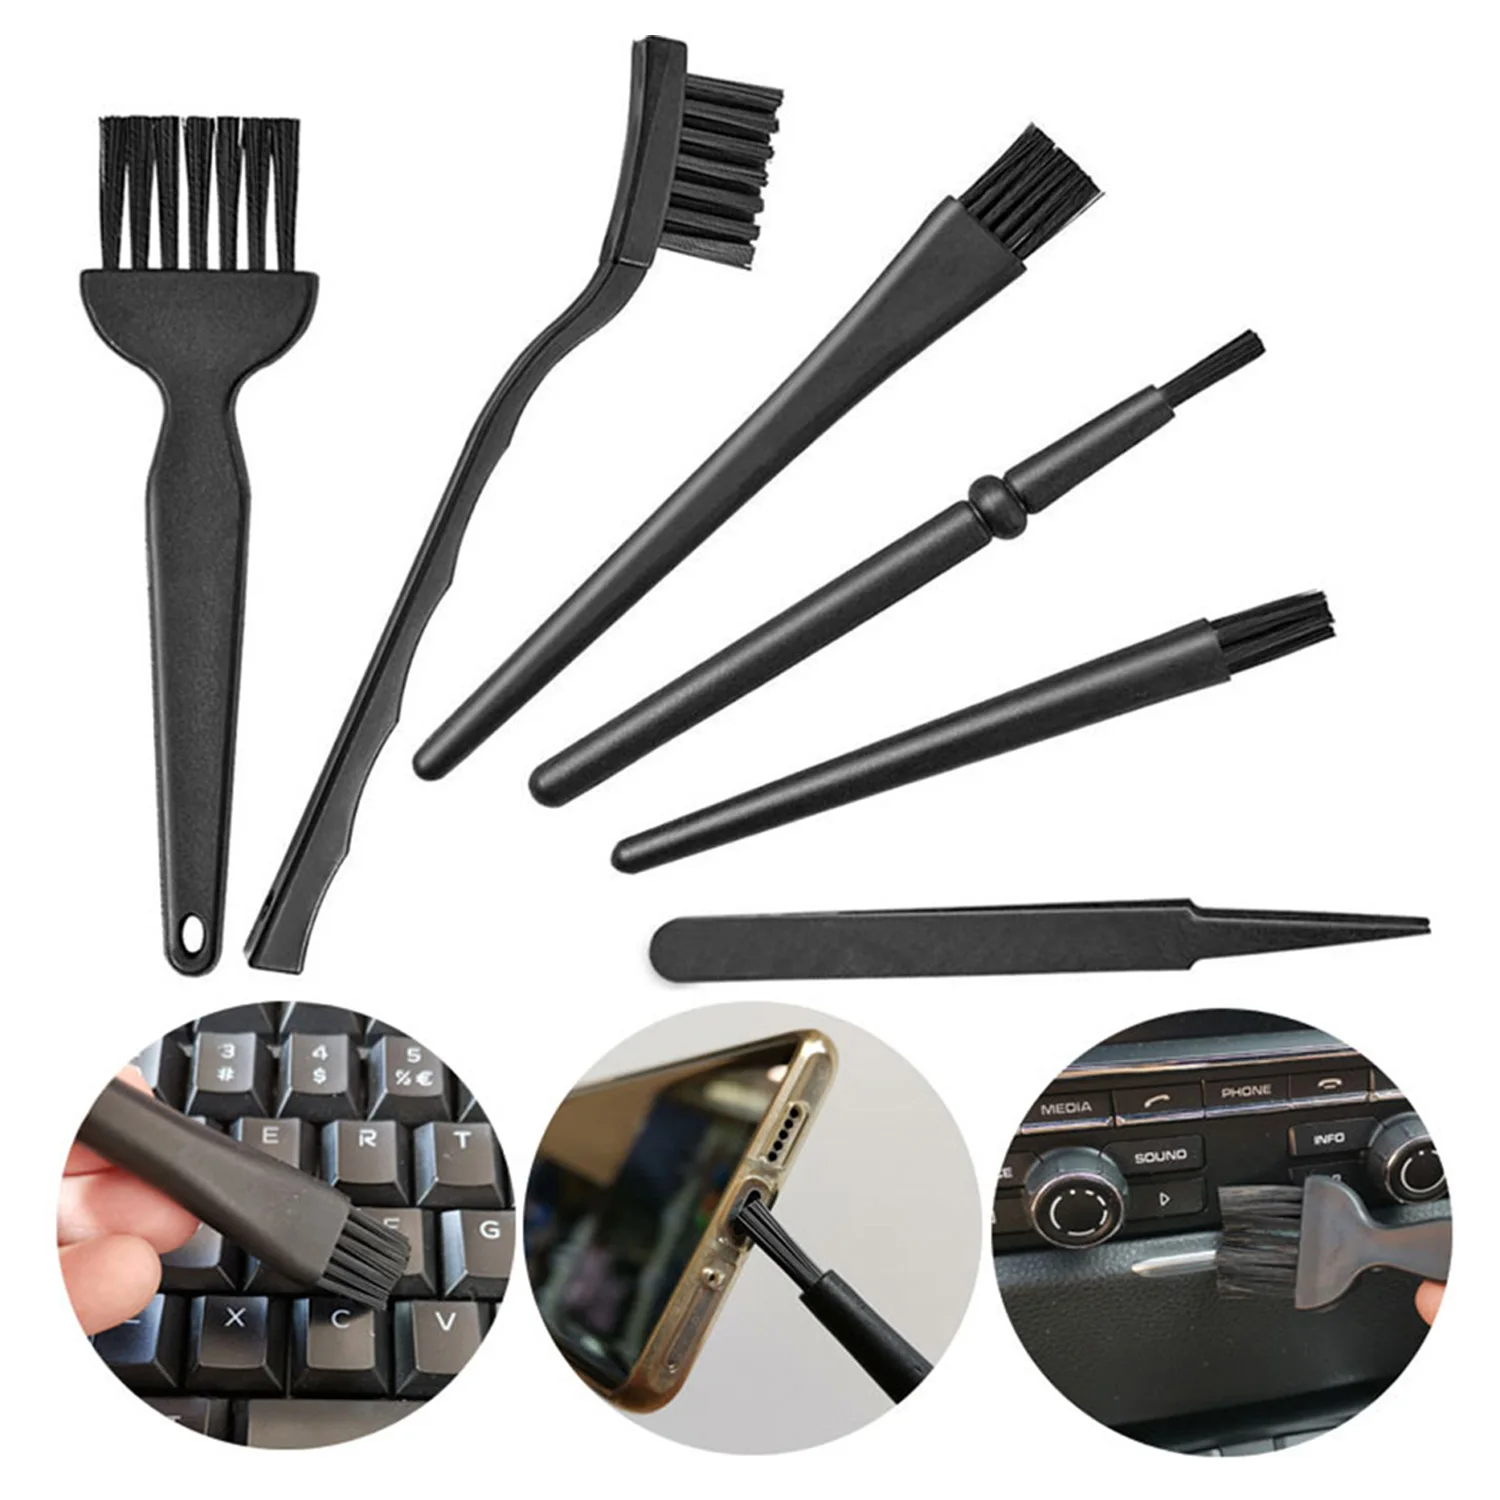 

Professional Cleaning Kit 6pcs Small Portable Anti Static Computer Laptop Keyboard Dust Brushes Cleaner Accessories